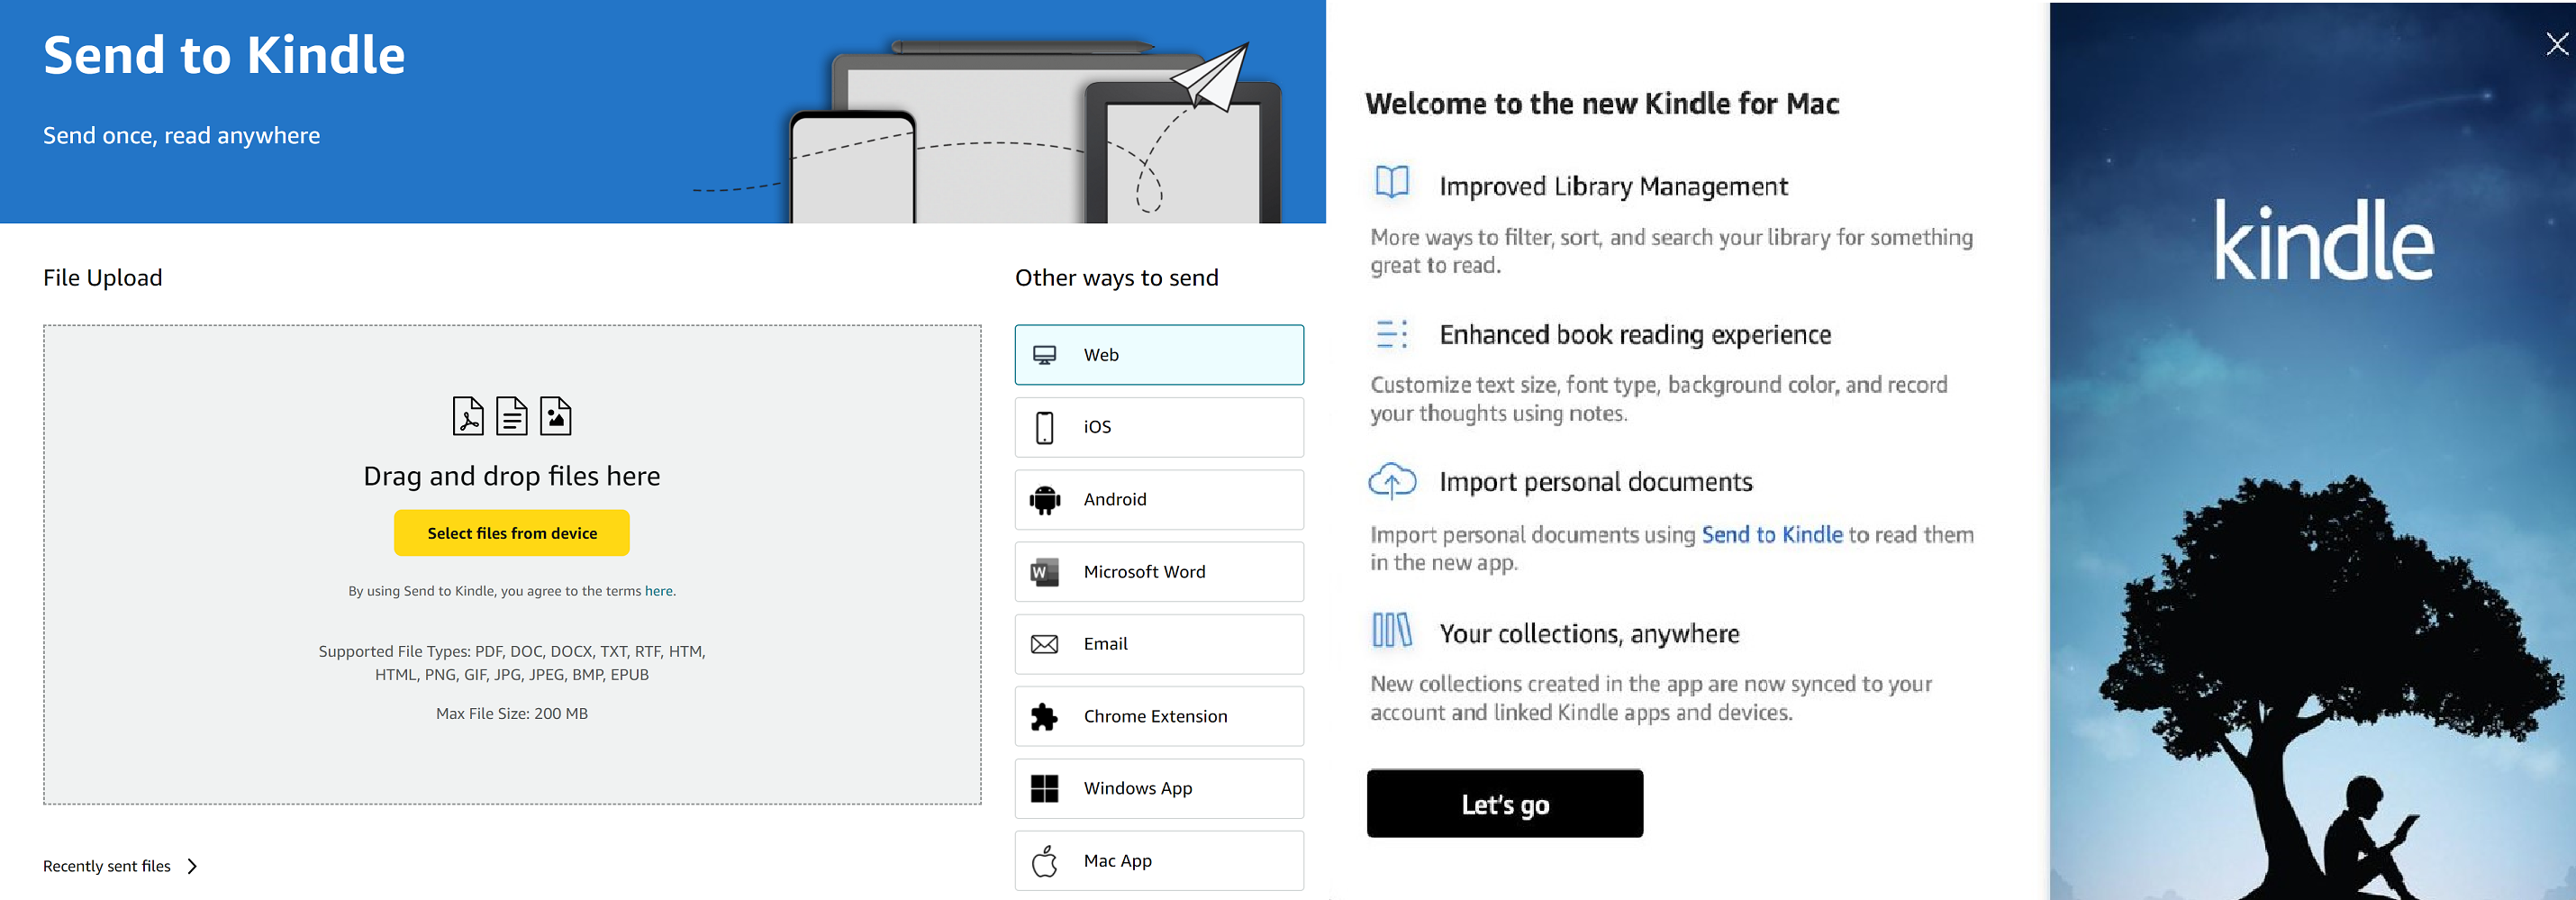 e讀新聞：Amazon Kindle新功能總覽──new Kindle for Mac、Send to Kindle及Kindle Personal Documents升級